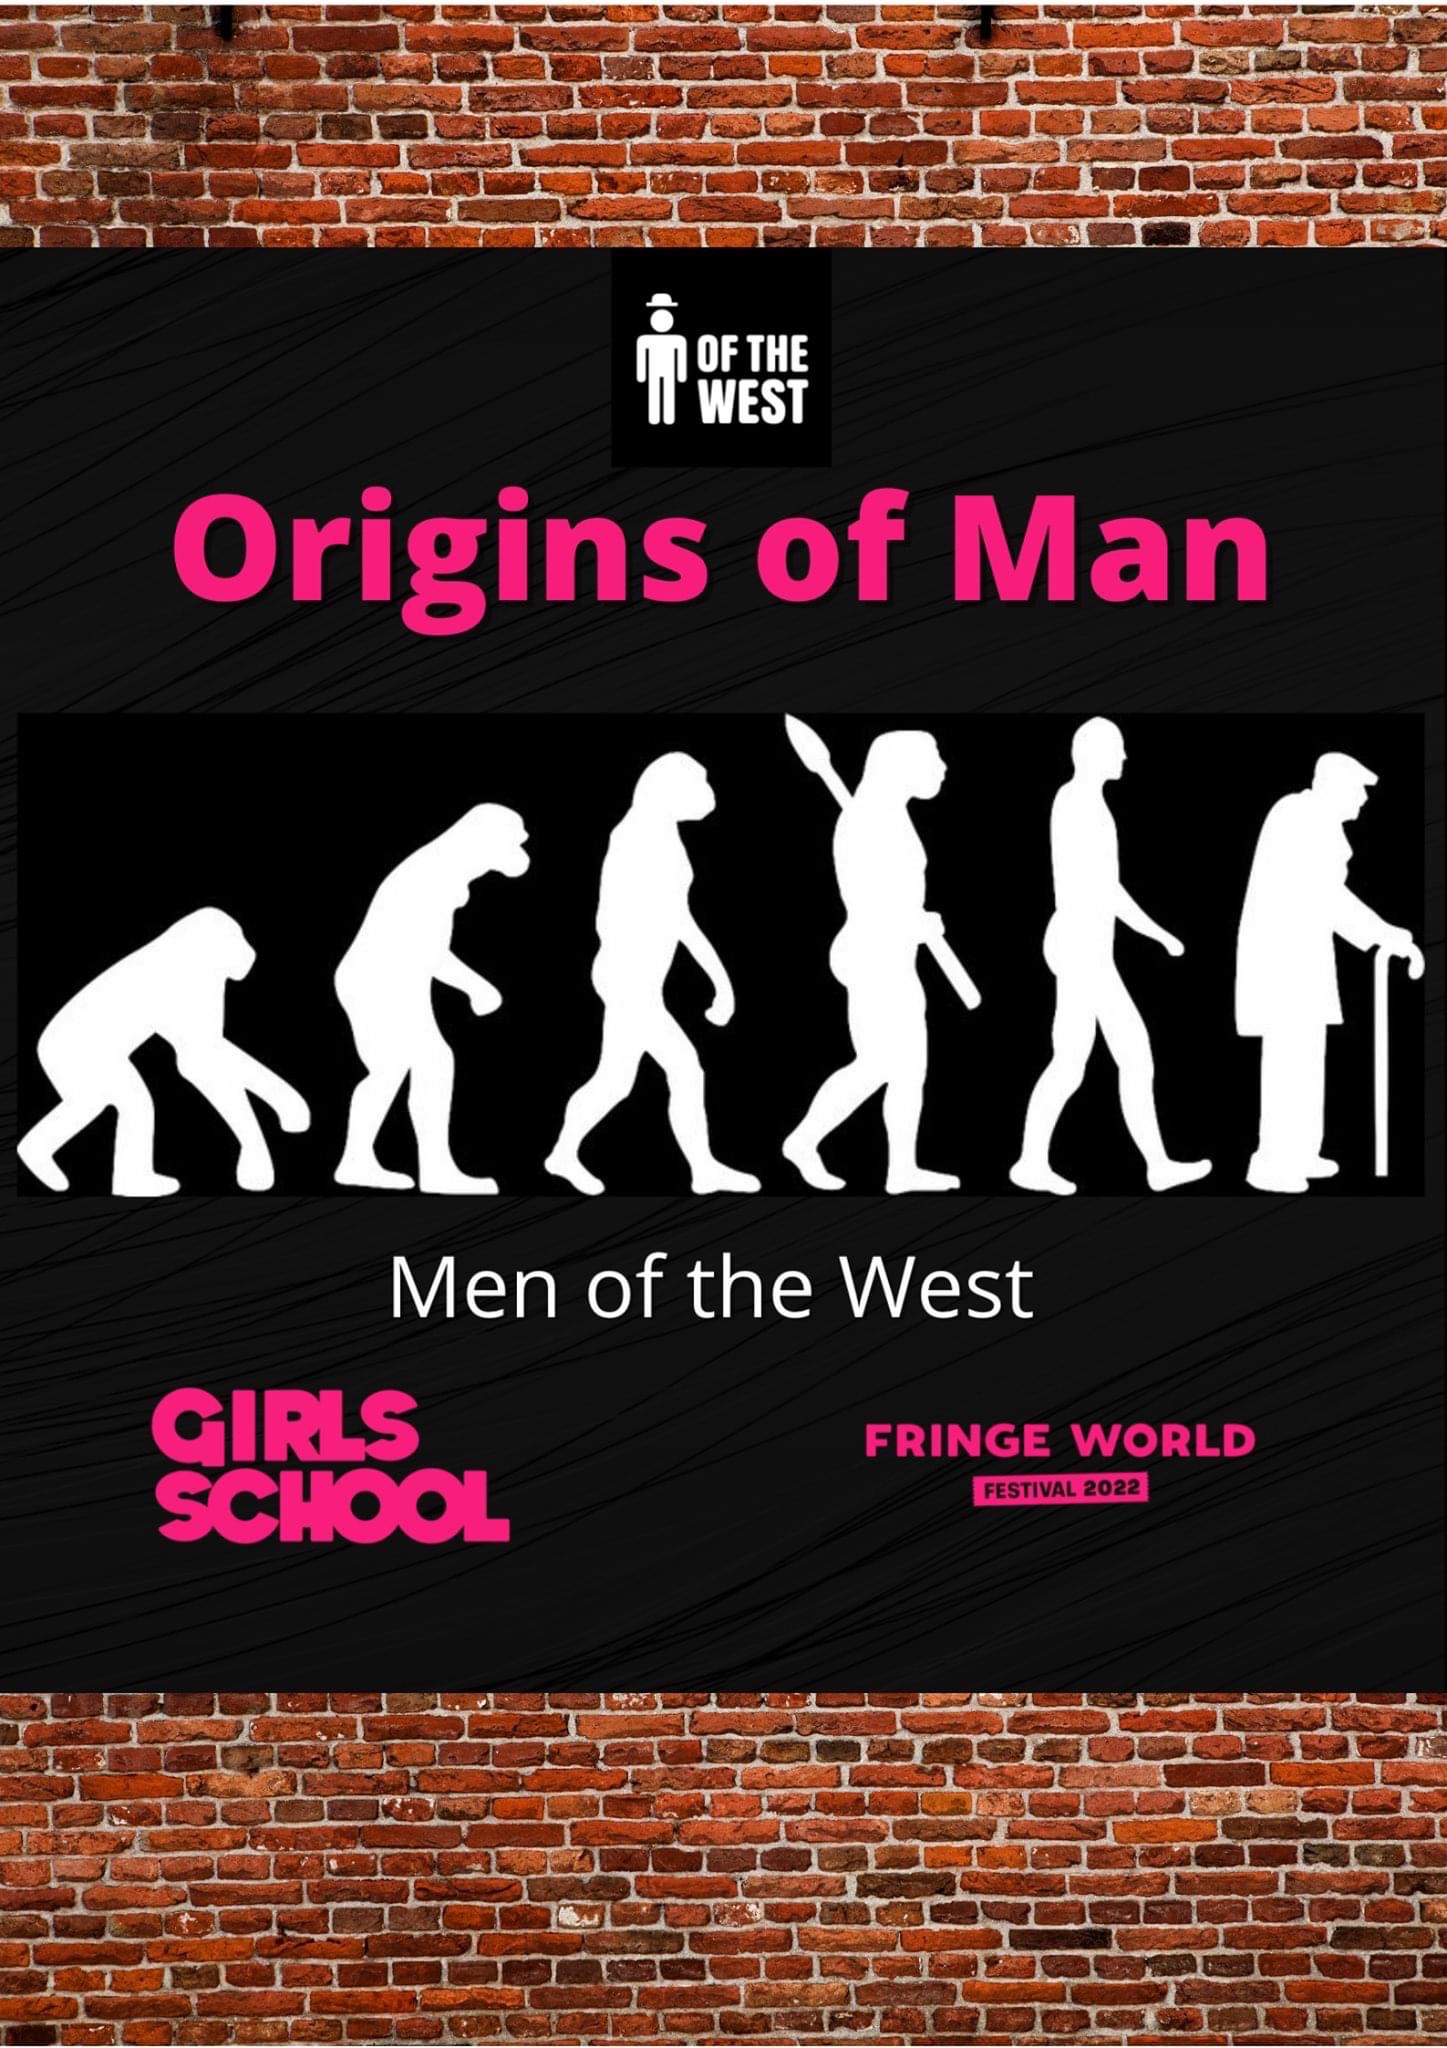 Poster image for the Fringe World 2022 show "Orignins of Man" Image references Darwins Origin of the Species